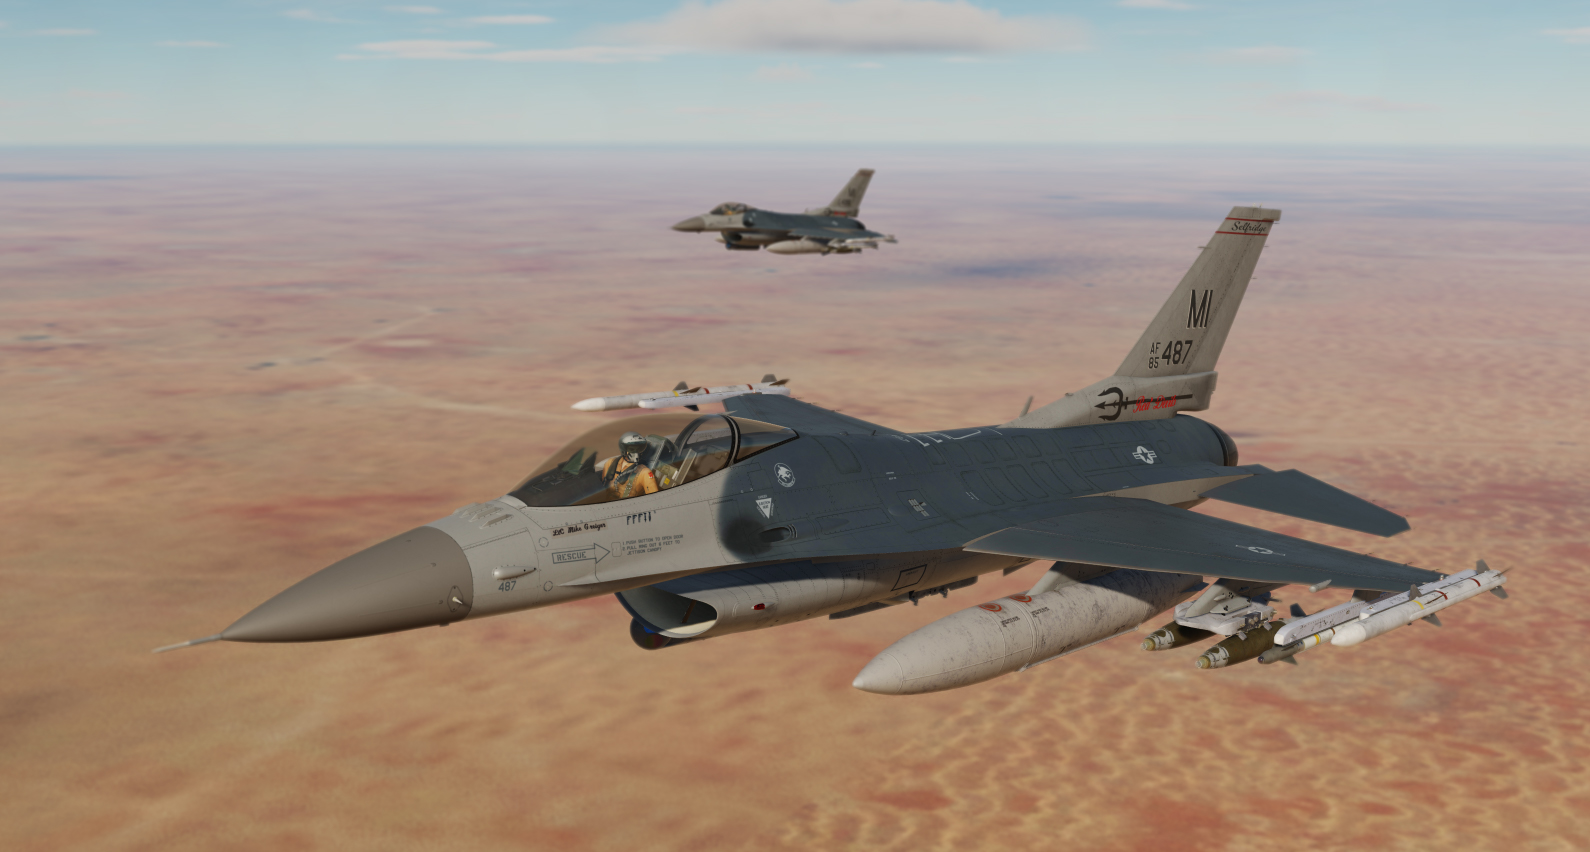 107th Fighter Squadron, 127th Fighter Wing, MI ANG, 85-1487 and 85-1498 (Iraq 2004)